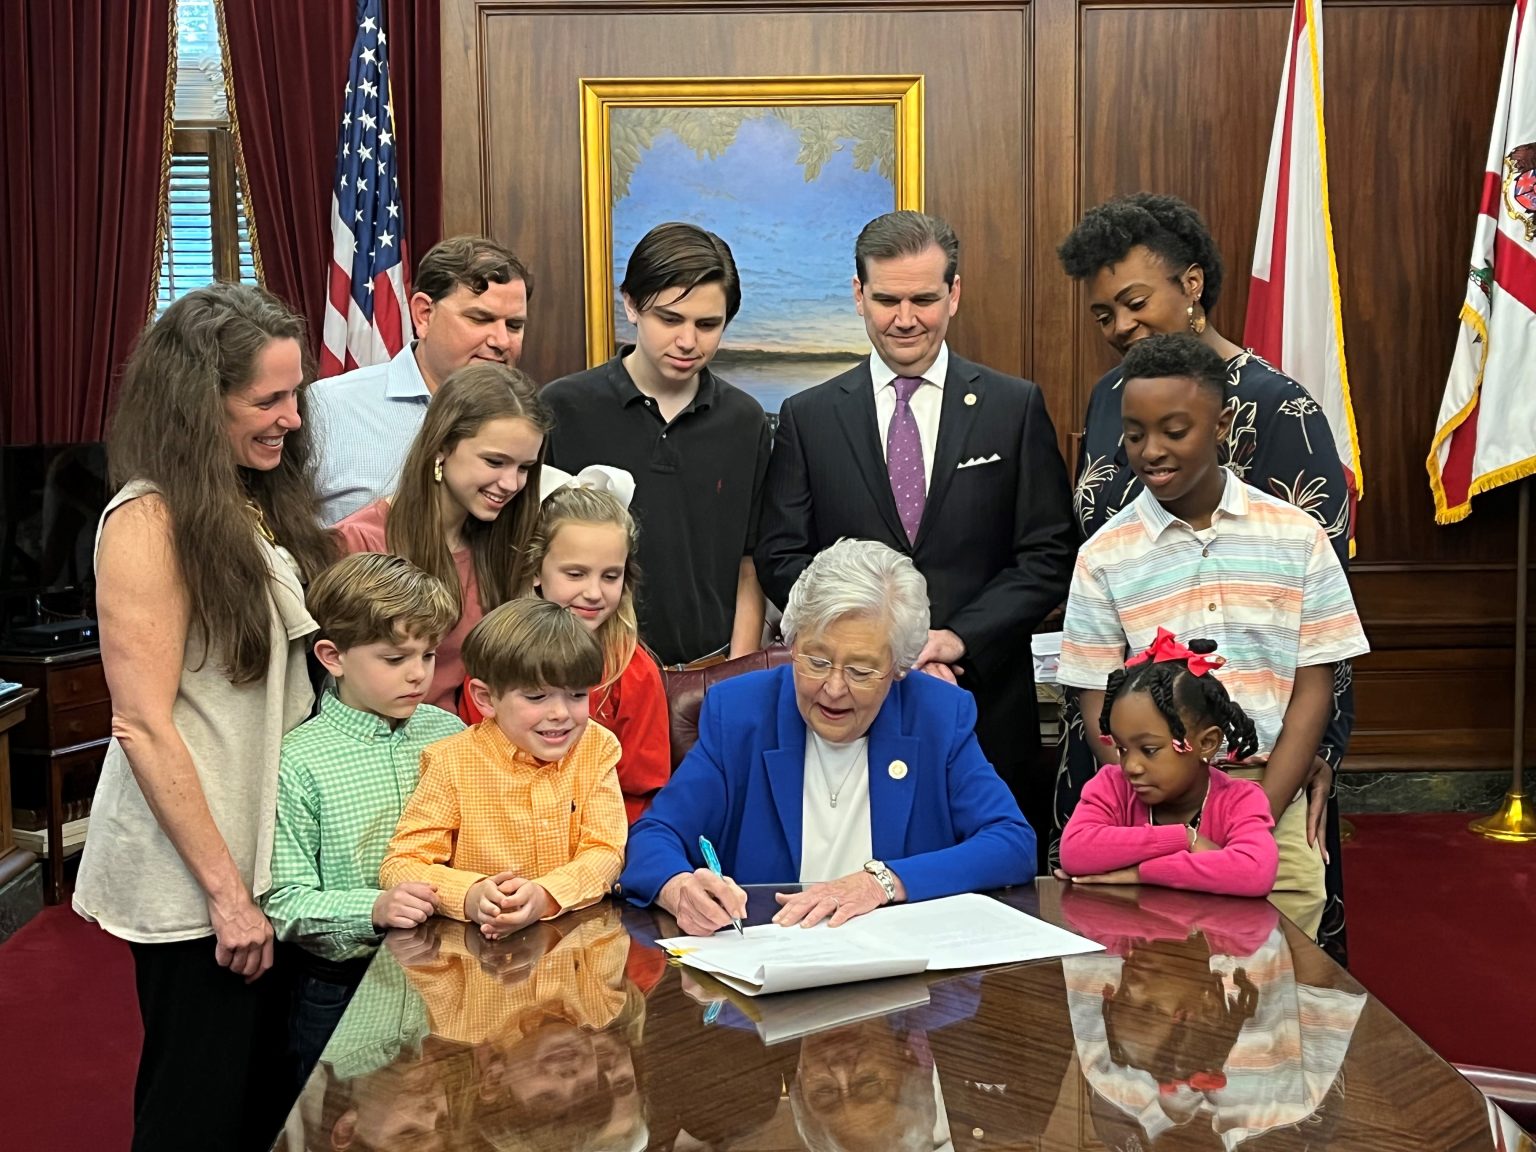 governor-ivey-signs-house-bill-231-provides-tax-relief-to-alabama-families-office-of-the